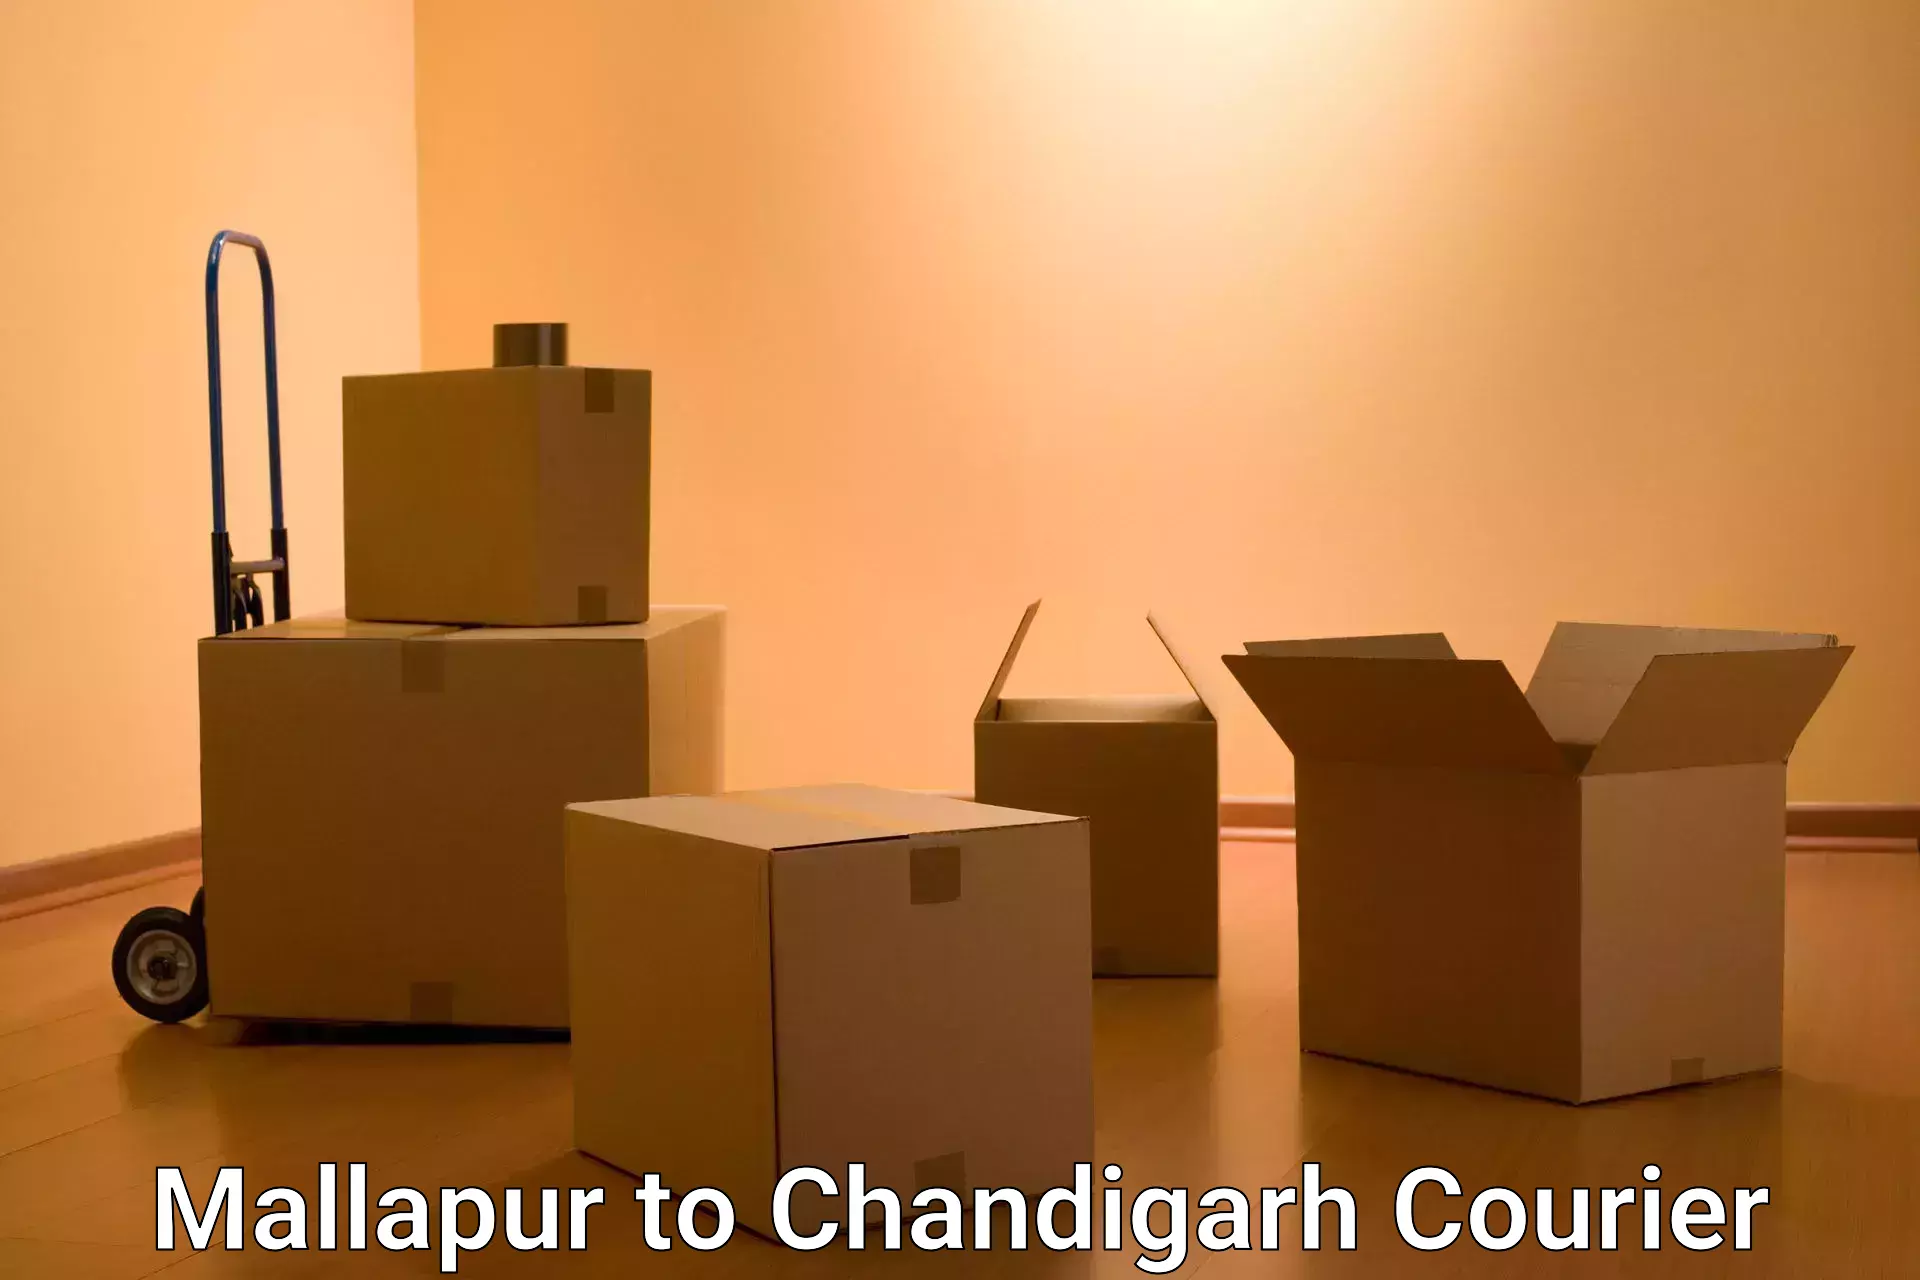 Courier service innovation in Mallapur to Chandigarh